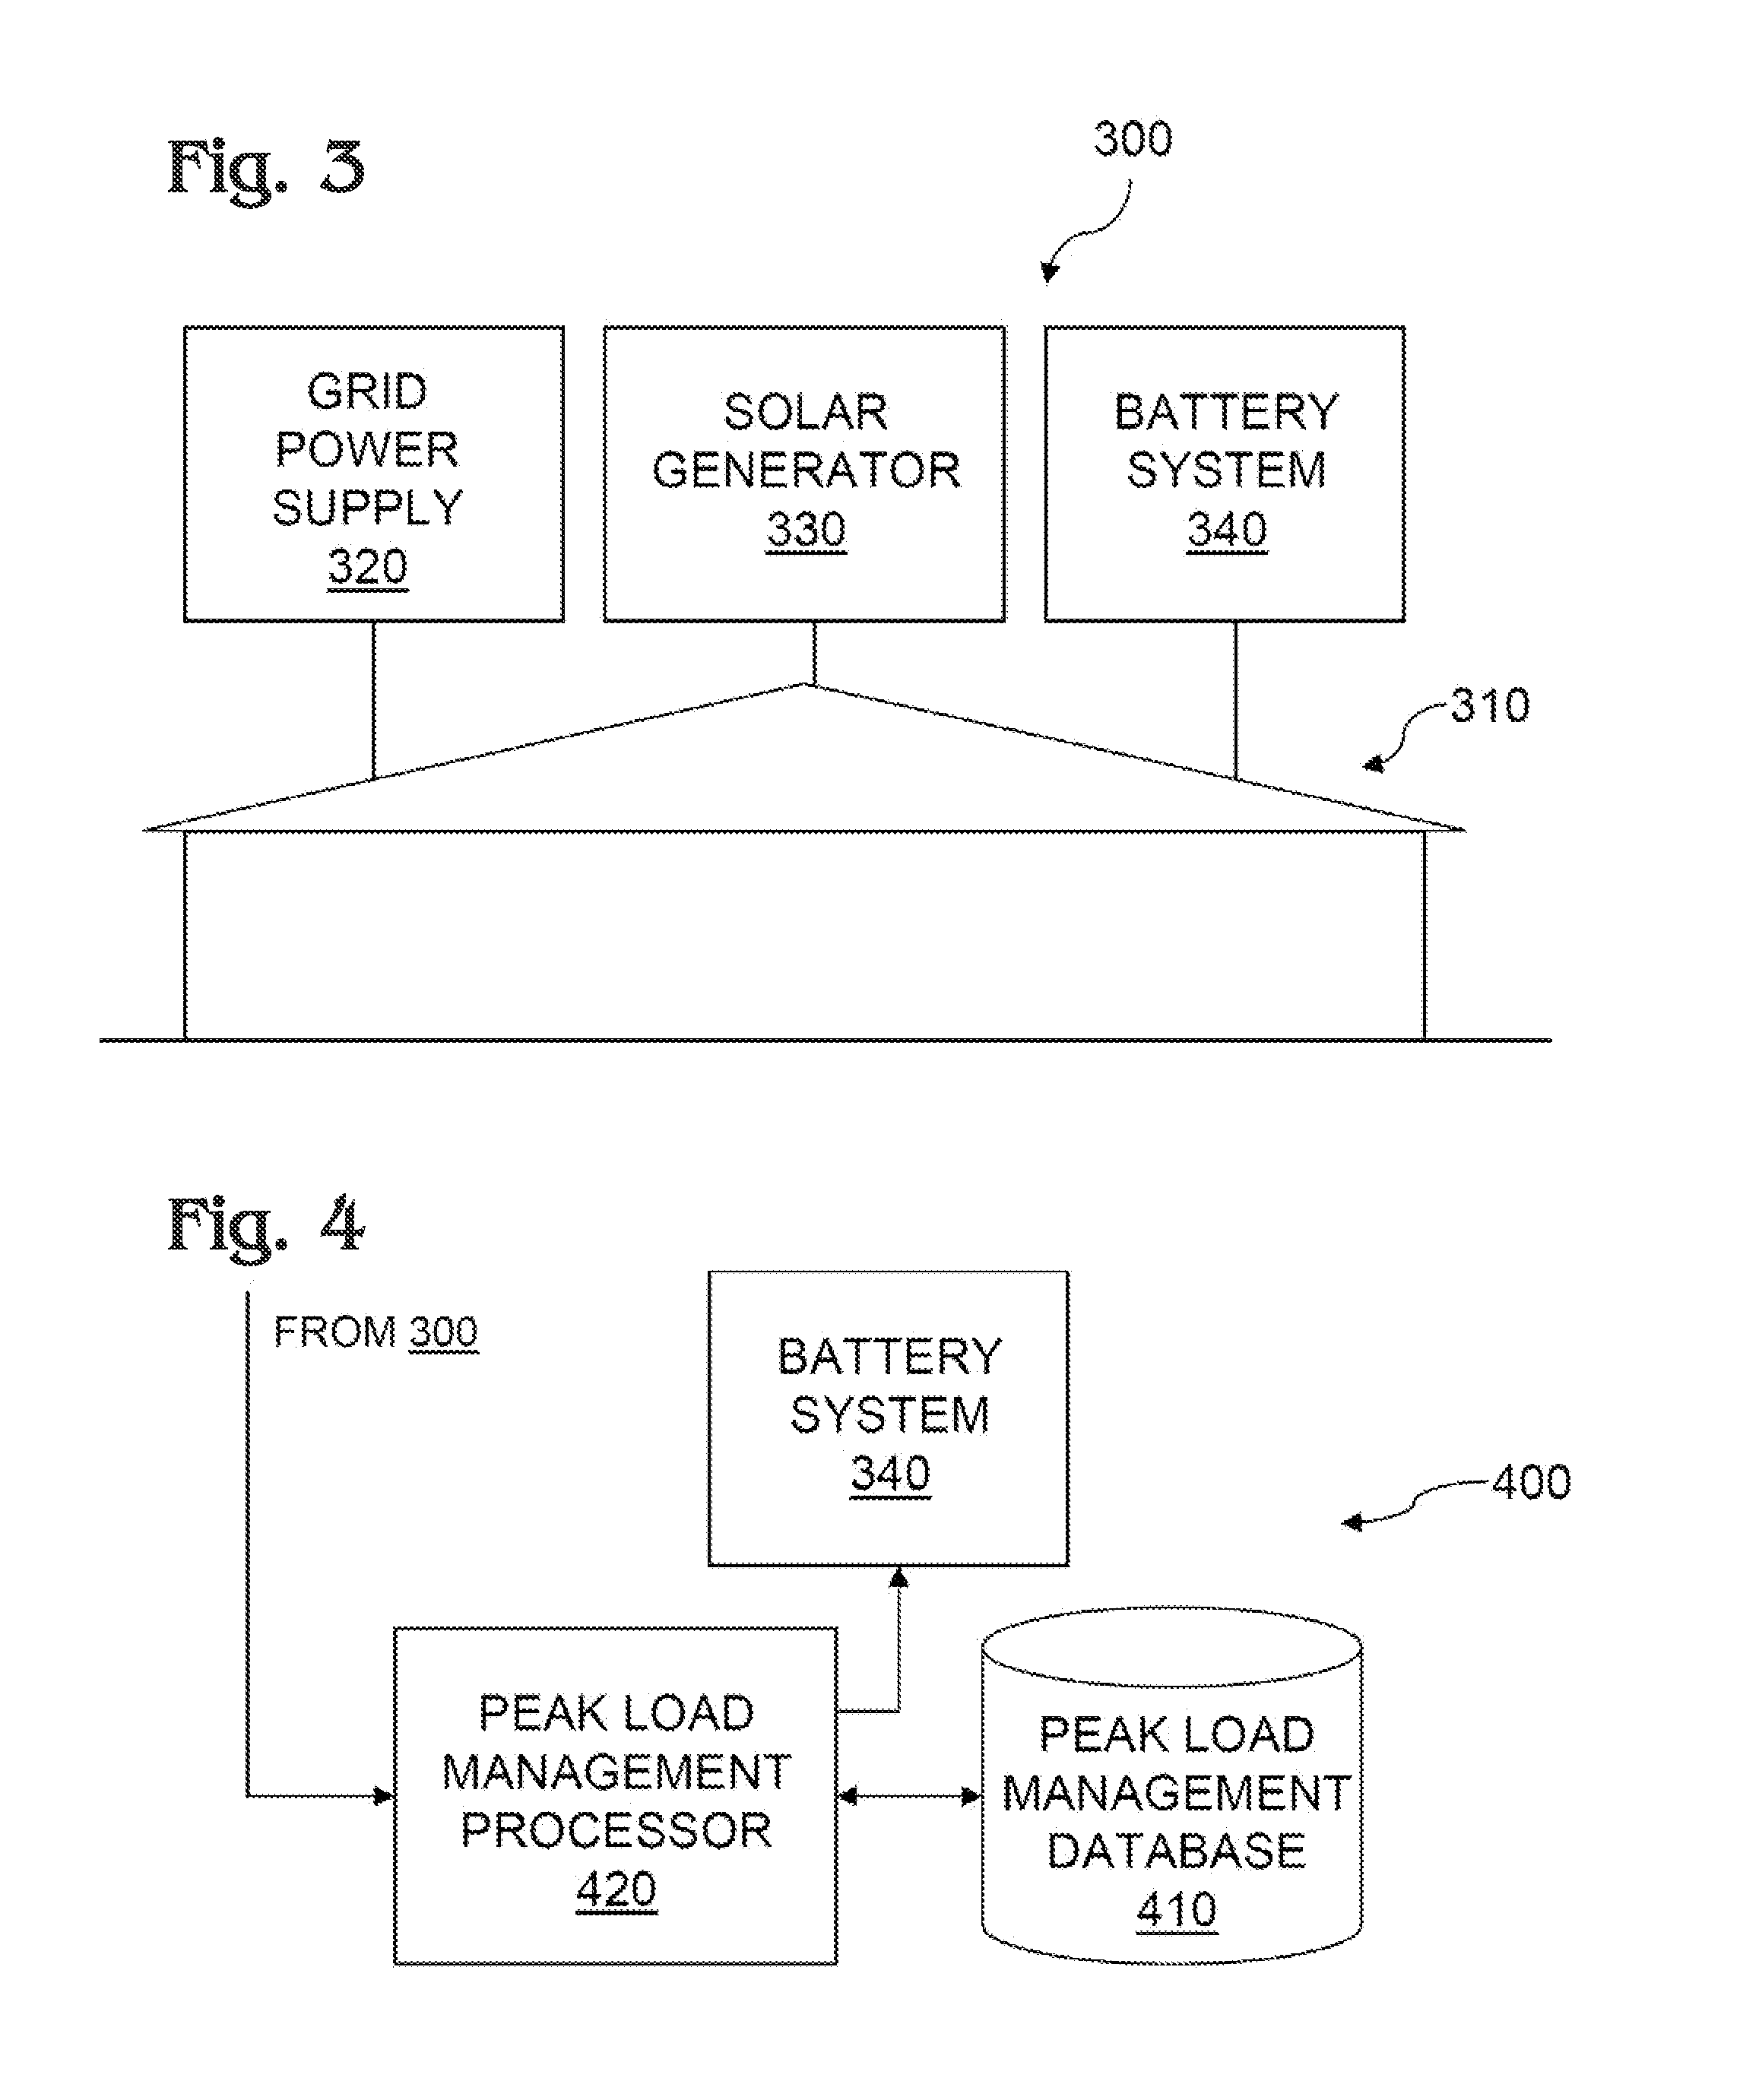 Method and System for Reducing Peak Load Charge on Utility Bill Using Target Peak Load and Countermeasures